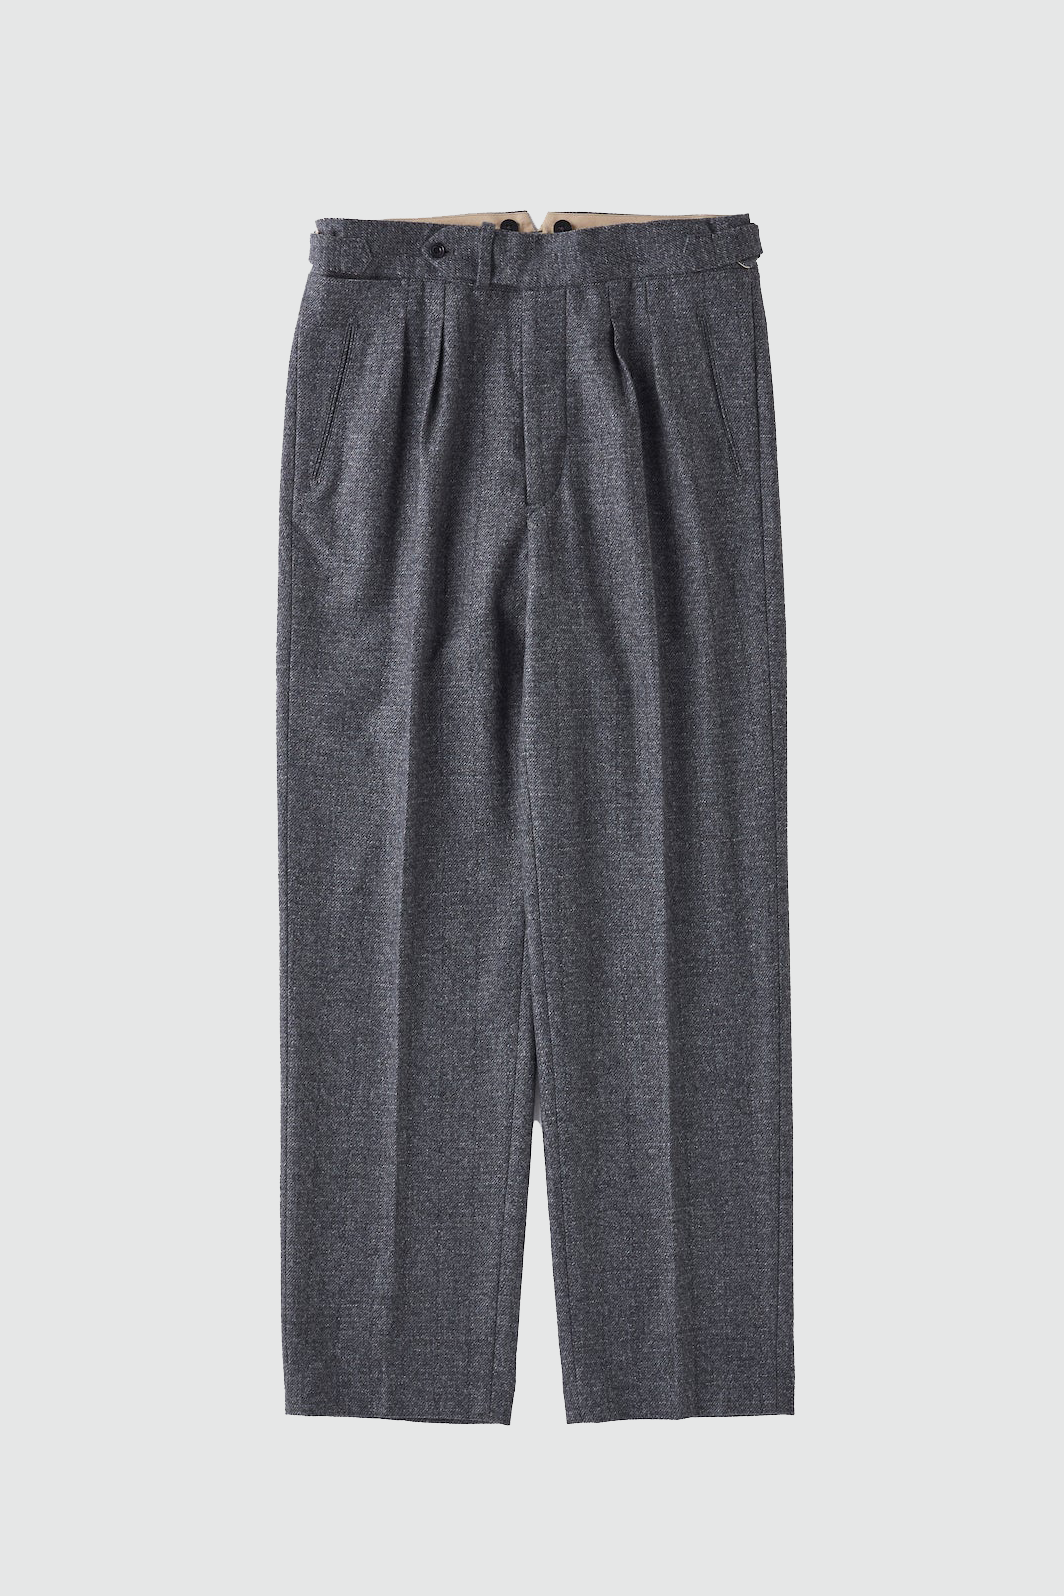 OLD JOE DOUBLE-PLEATED SMARTY TROUSER (2COL)